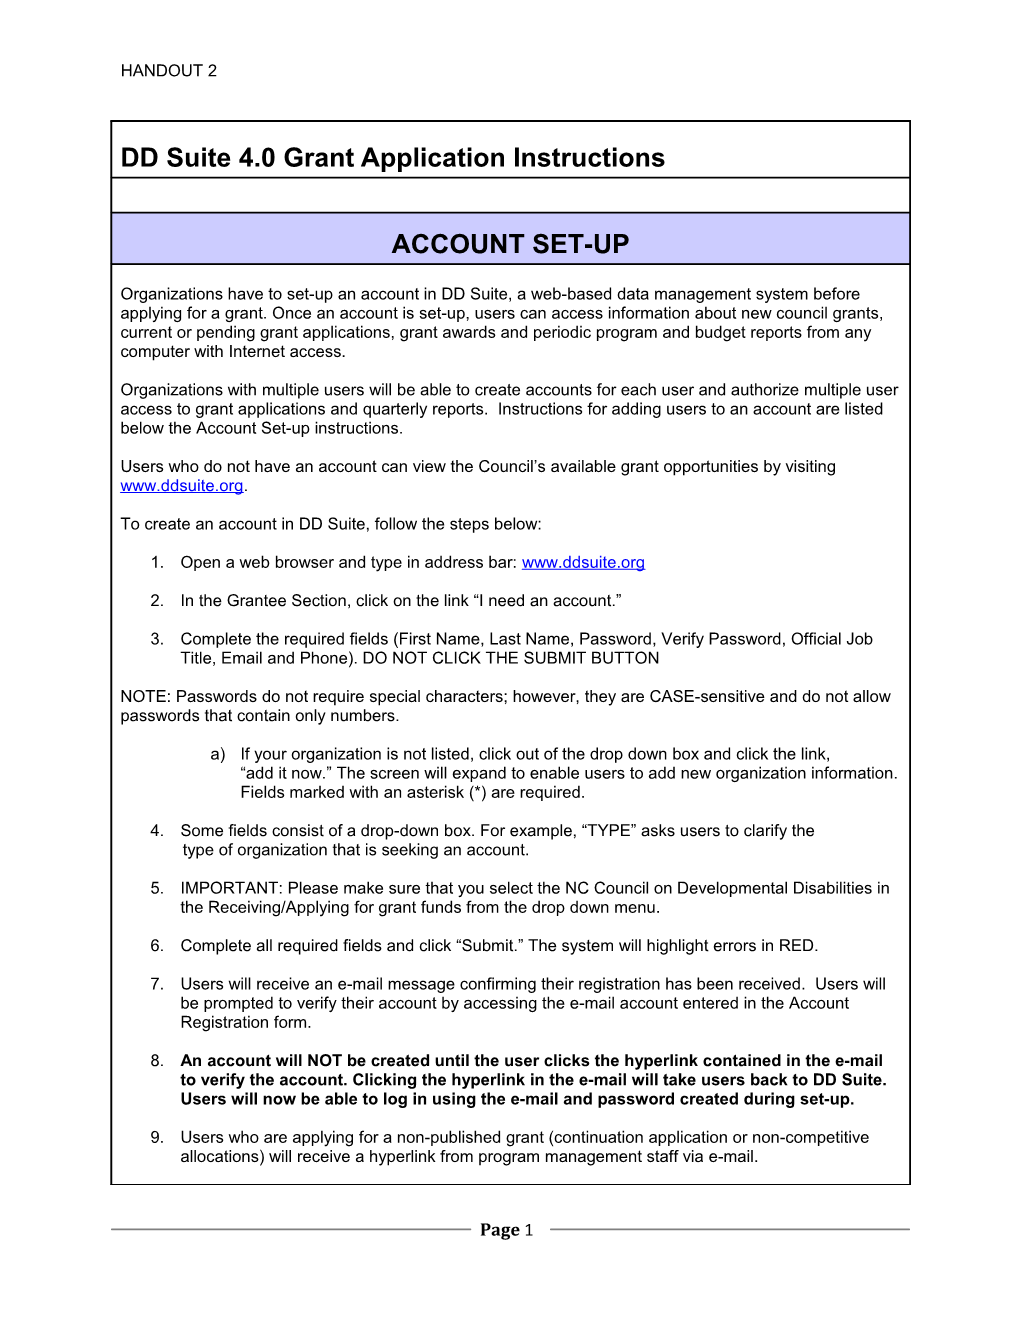 DD Suite 4.0 Grant Application Instructions